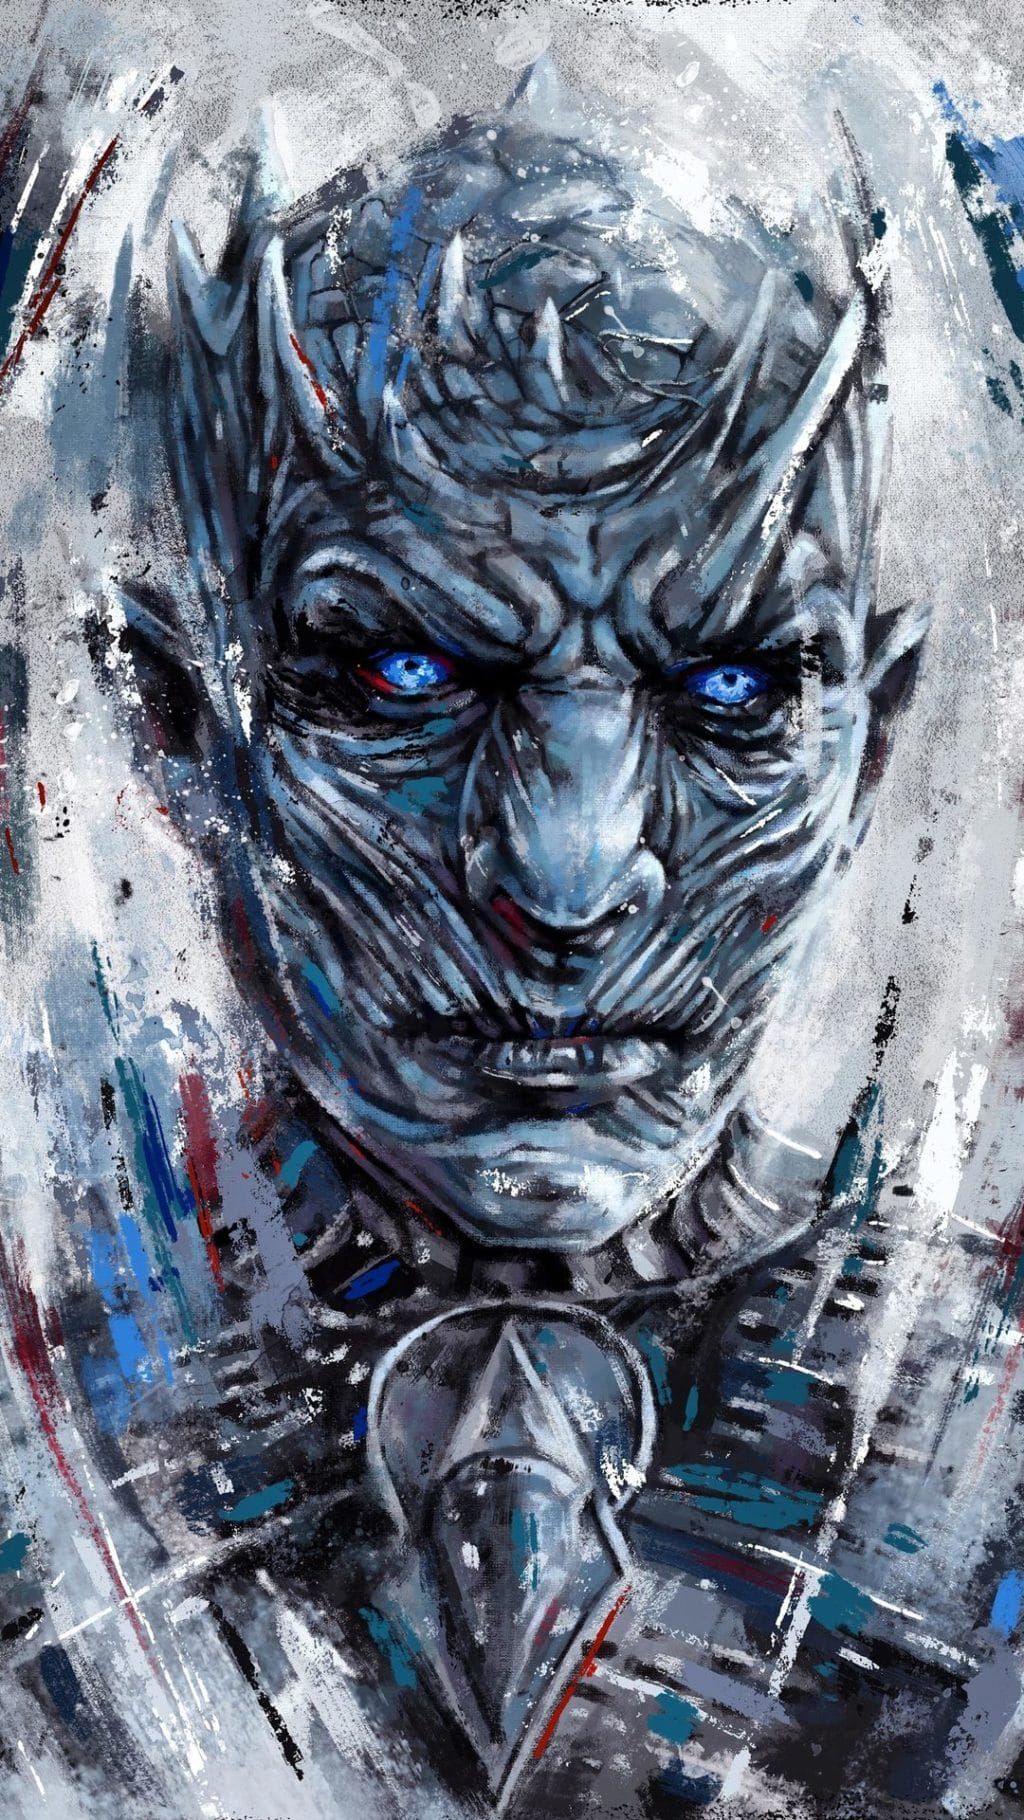 Cool Game of Thrones Wallpaper for iPhone and iPad. iPhone Hacks. HD wallpaper, iPhone wallpaper, Wallpaper